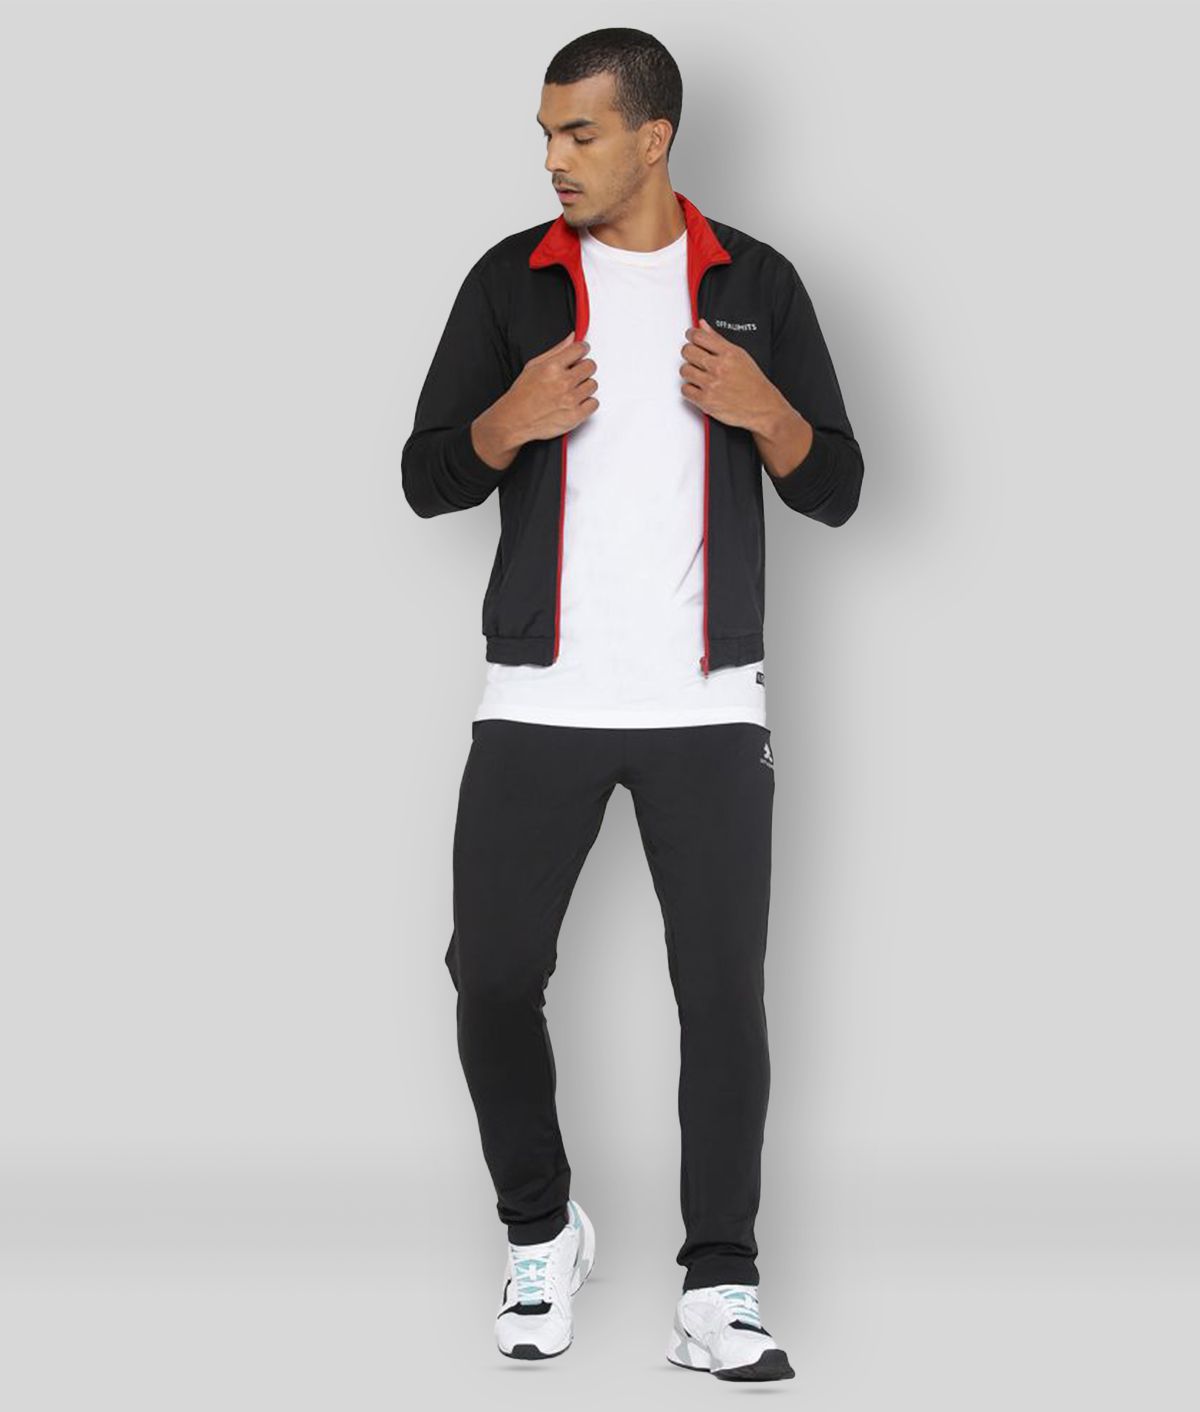     			OFF LIMITS - Black Polyester Regular Fit Solid Men's Sports Tracksuit ( Pack of 1 )